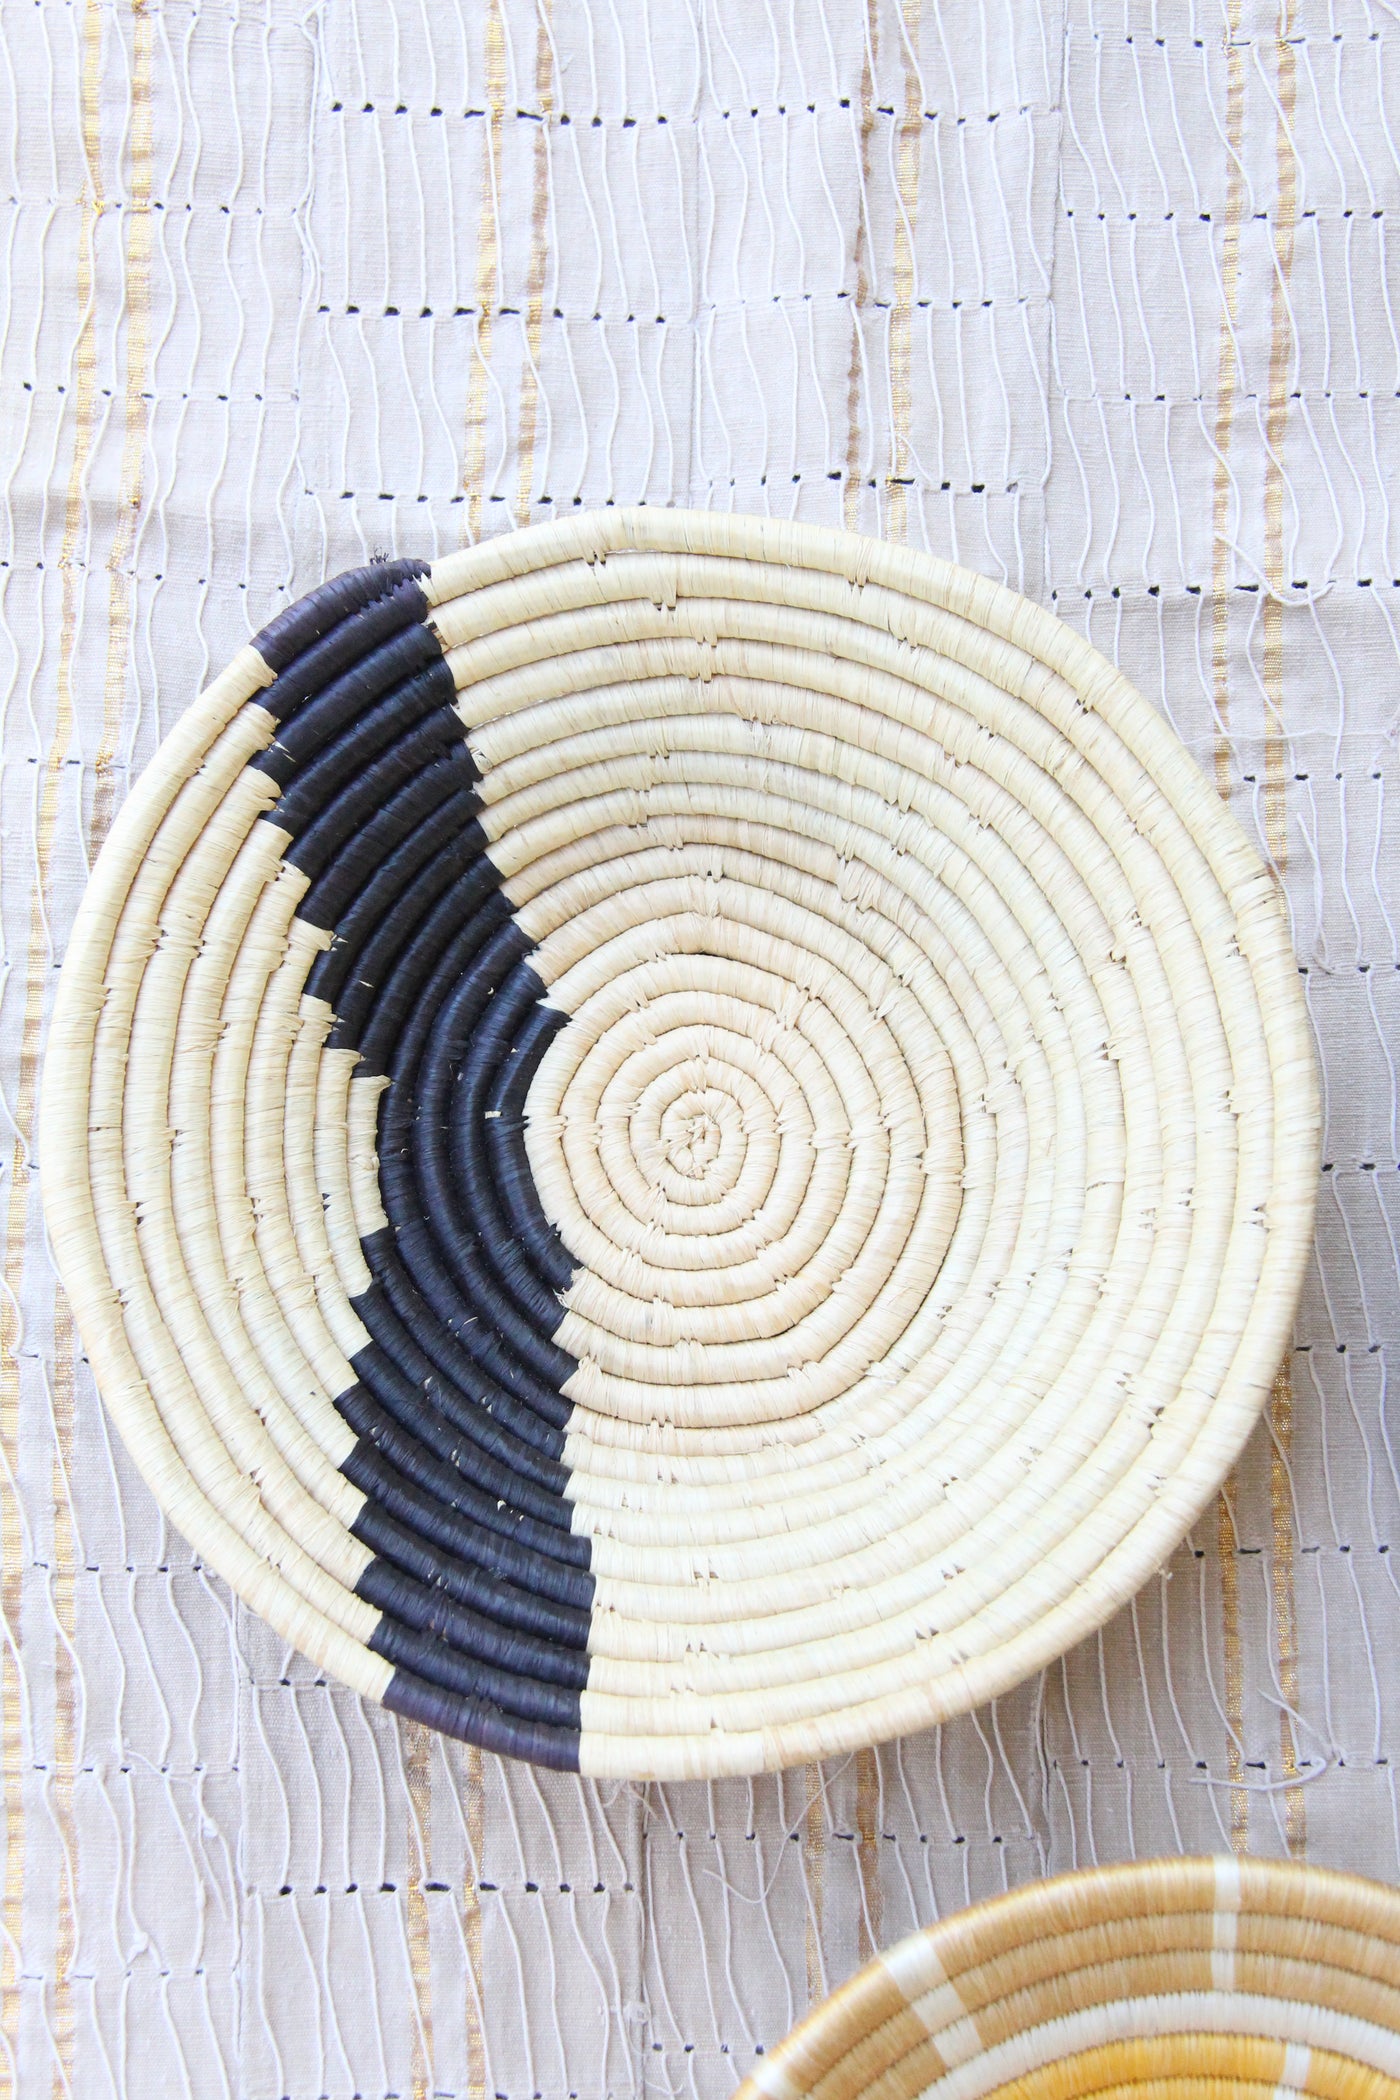 Winifred African Basket Collection, Black, Tan, from Rwanda, Set of 3